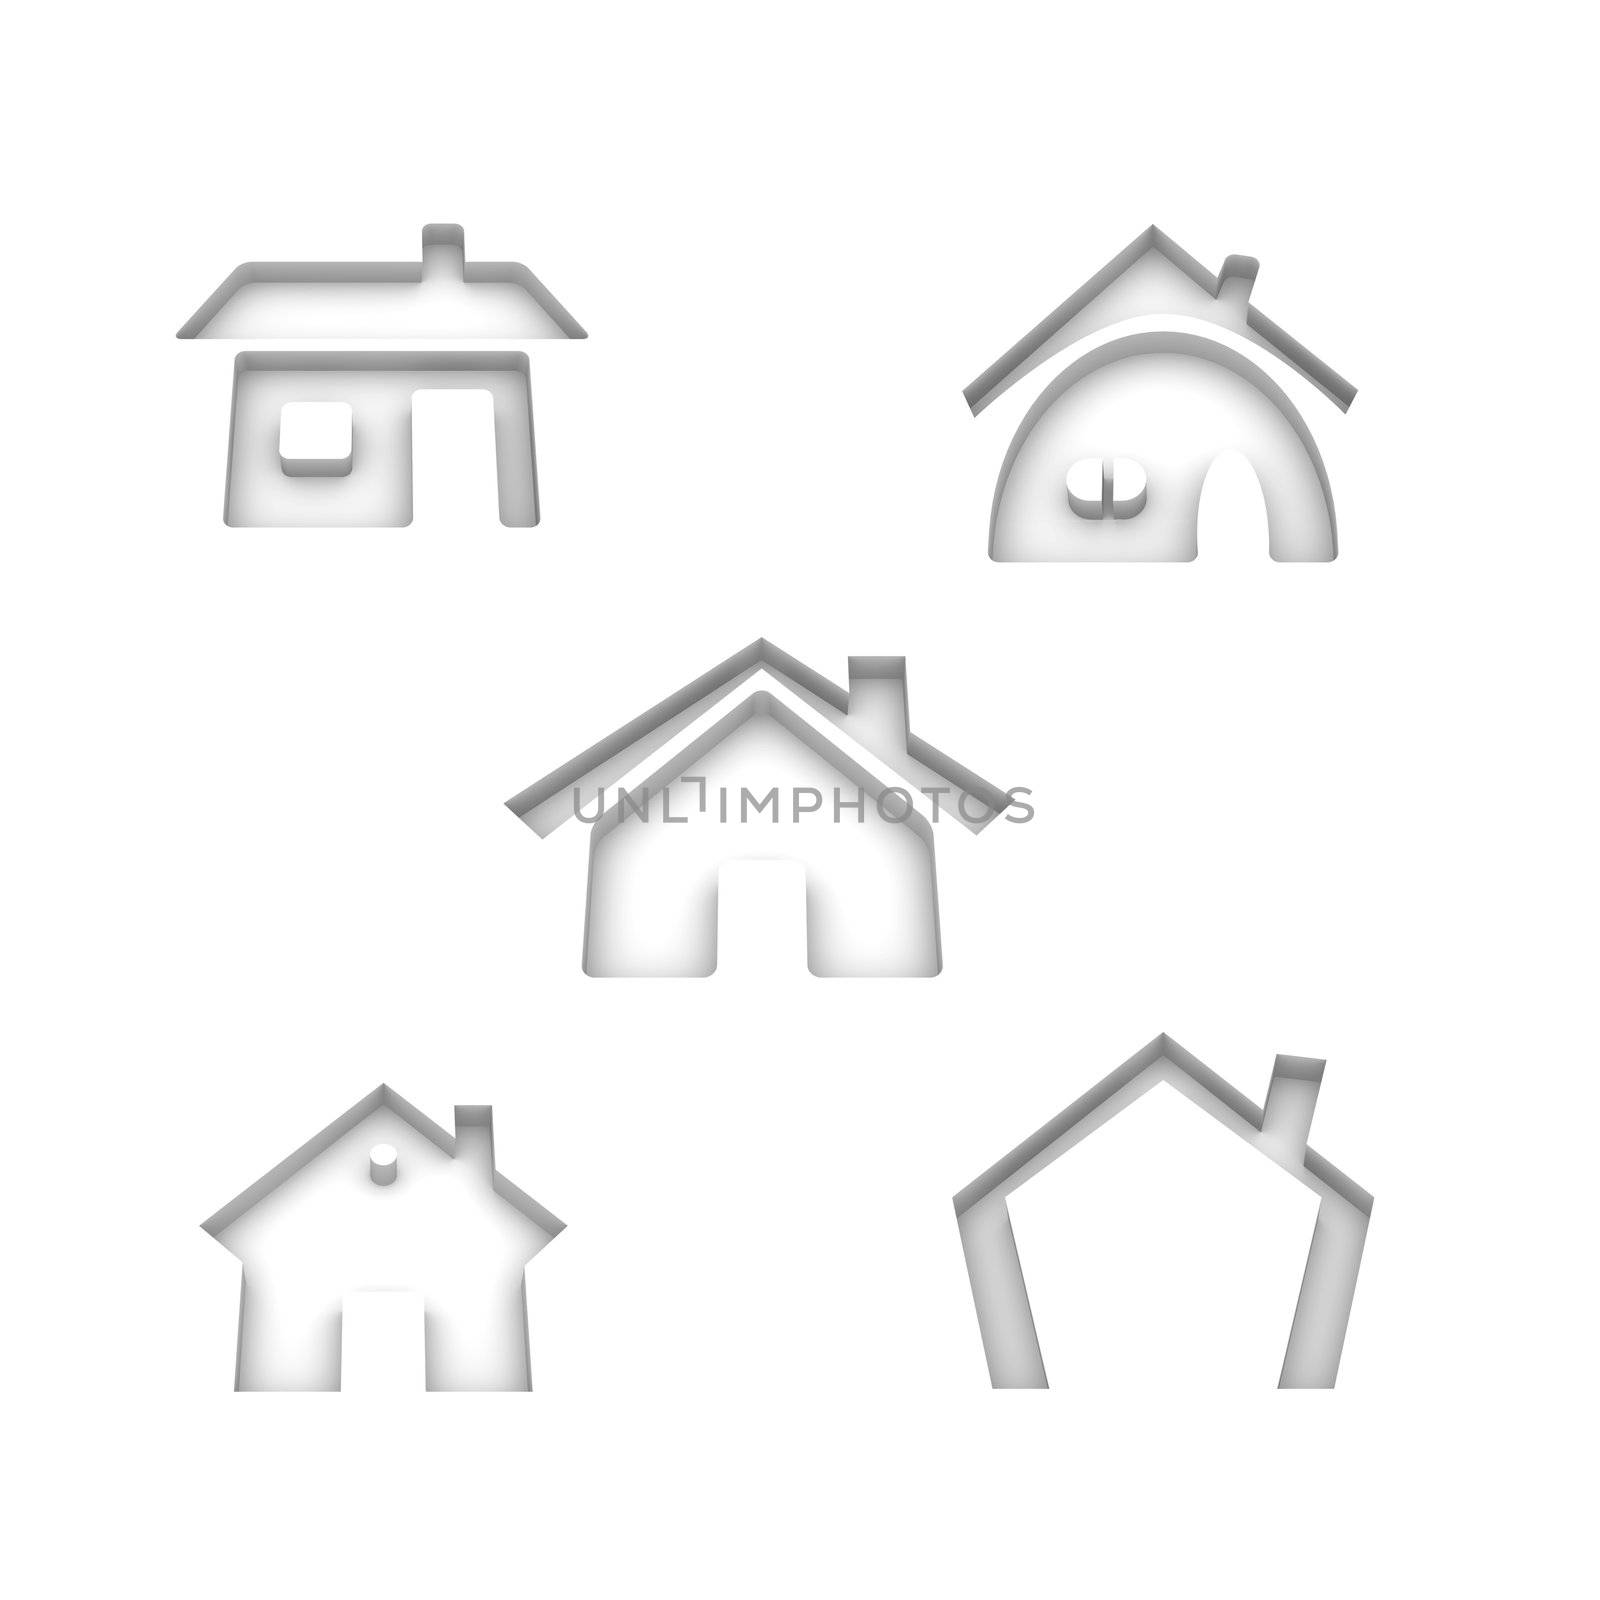 Set of 5 house 3d rendered icon variations